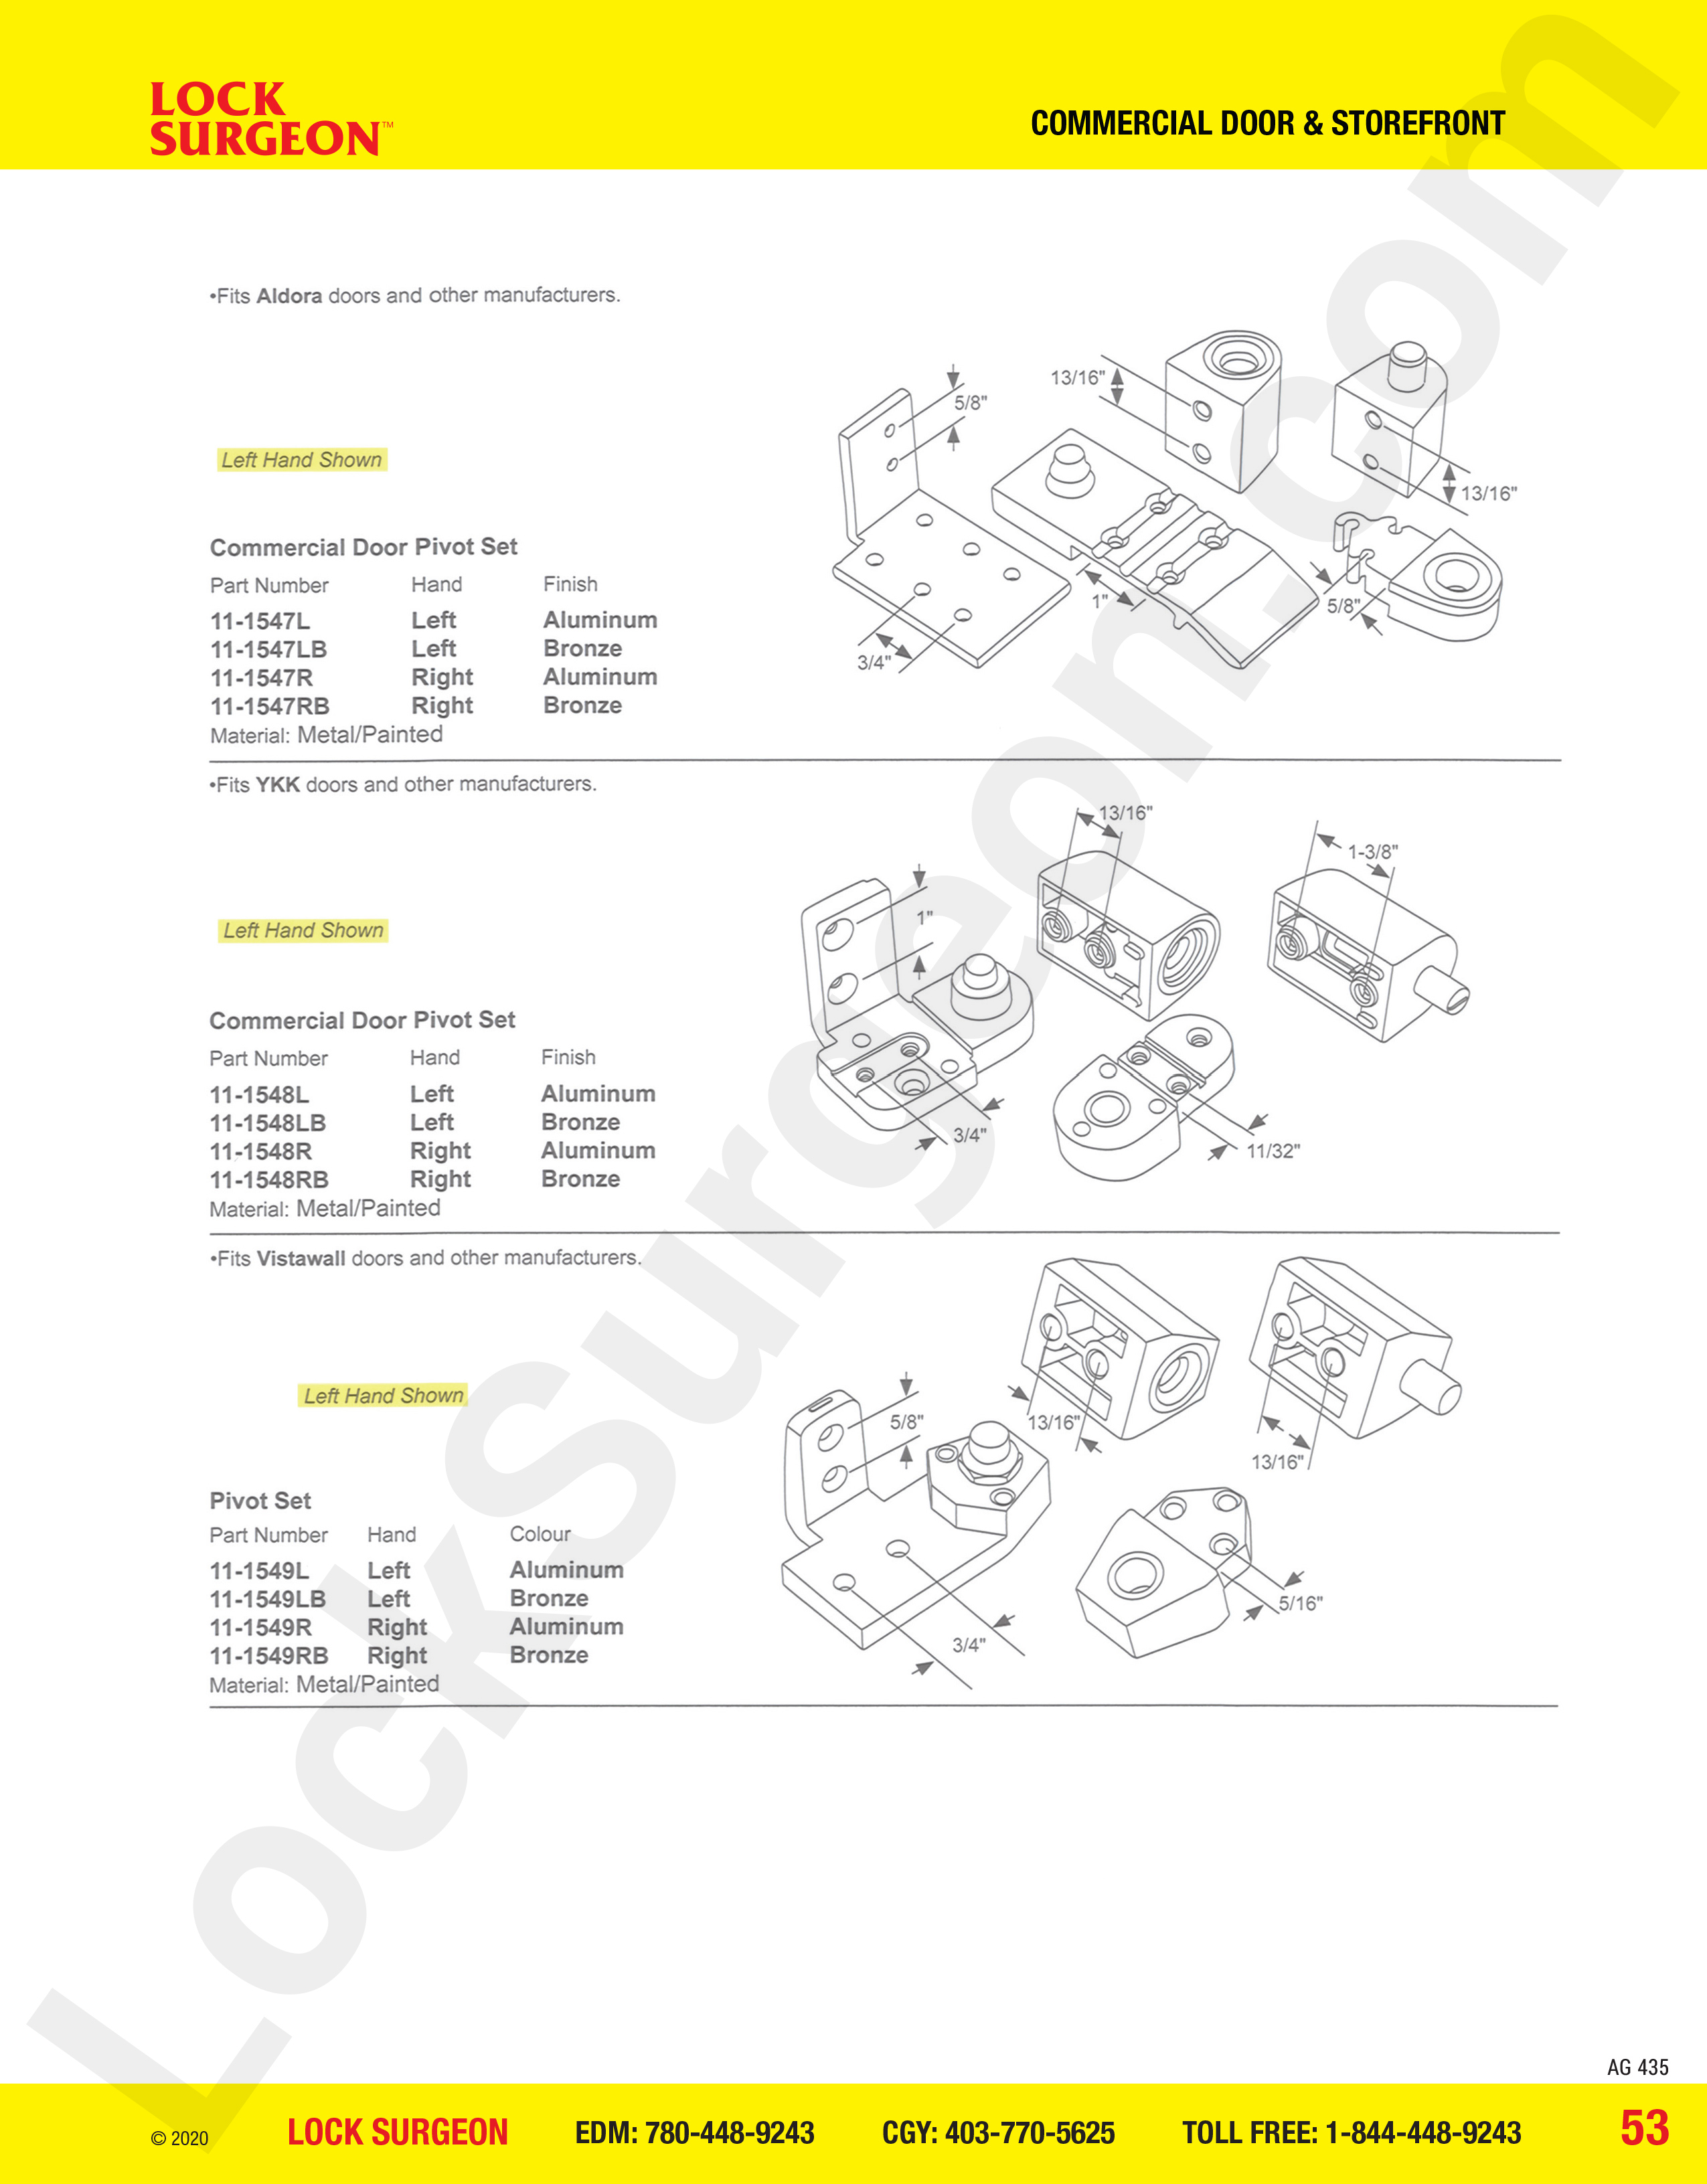 Commercial Door and Storefront parts for commercial door pivot sets